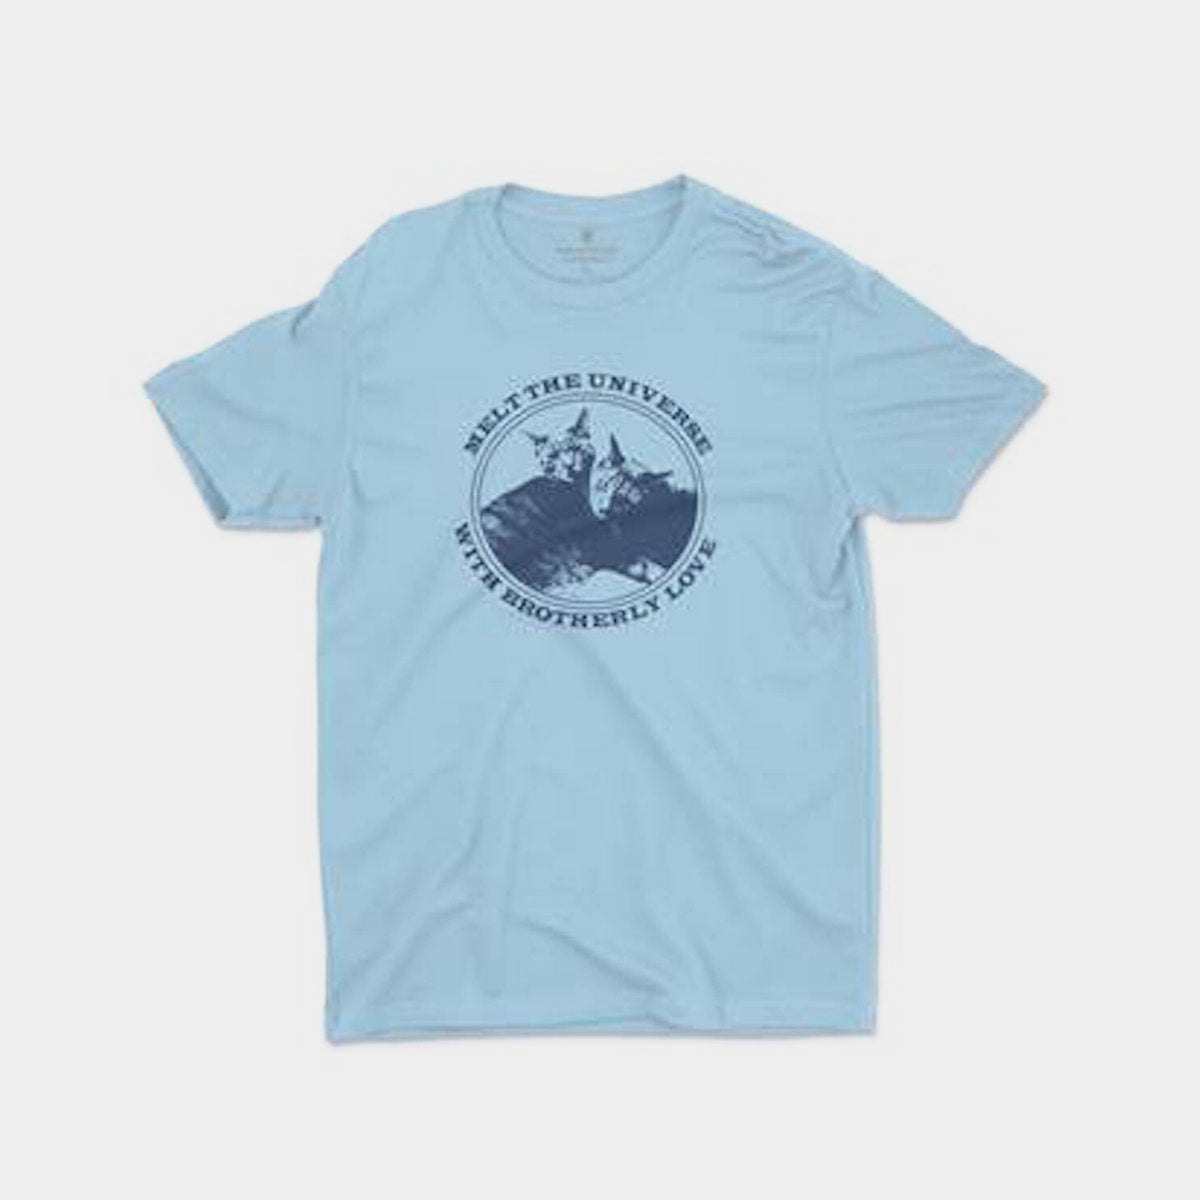 Joel Plaskett baby blue t-shirt with darker blue image of two cats "Melt the Universe with Brotherly Love"